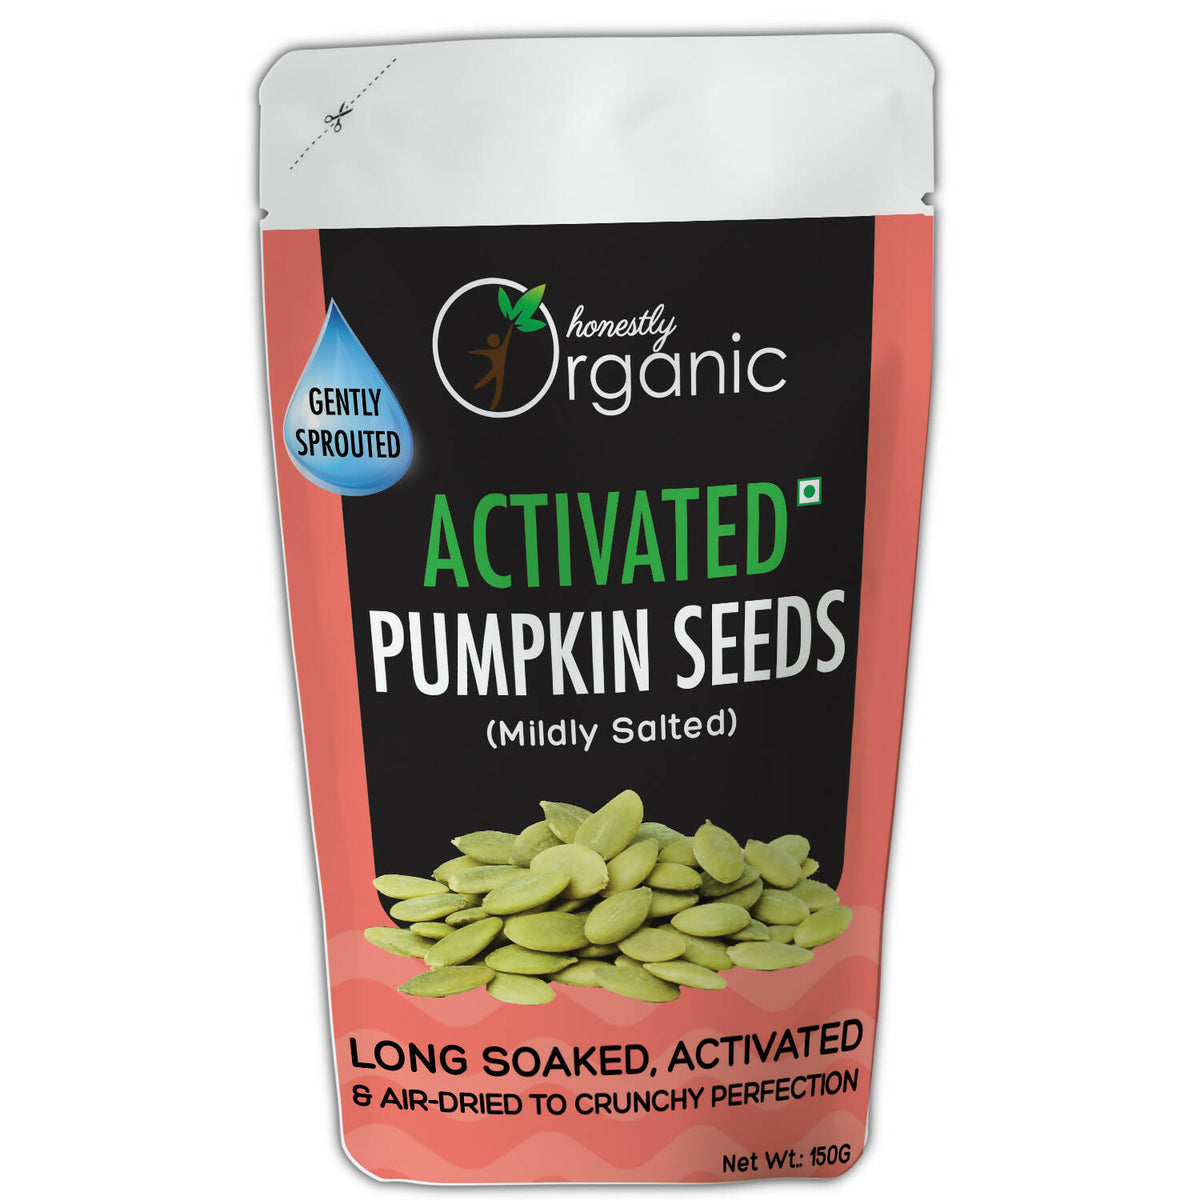 Activated/Sprouted Organic Pumpkin Seeds - Mildly Salted (Organic, Long Soaked & Air Dried to Crunchy Perfection) - 150g